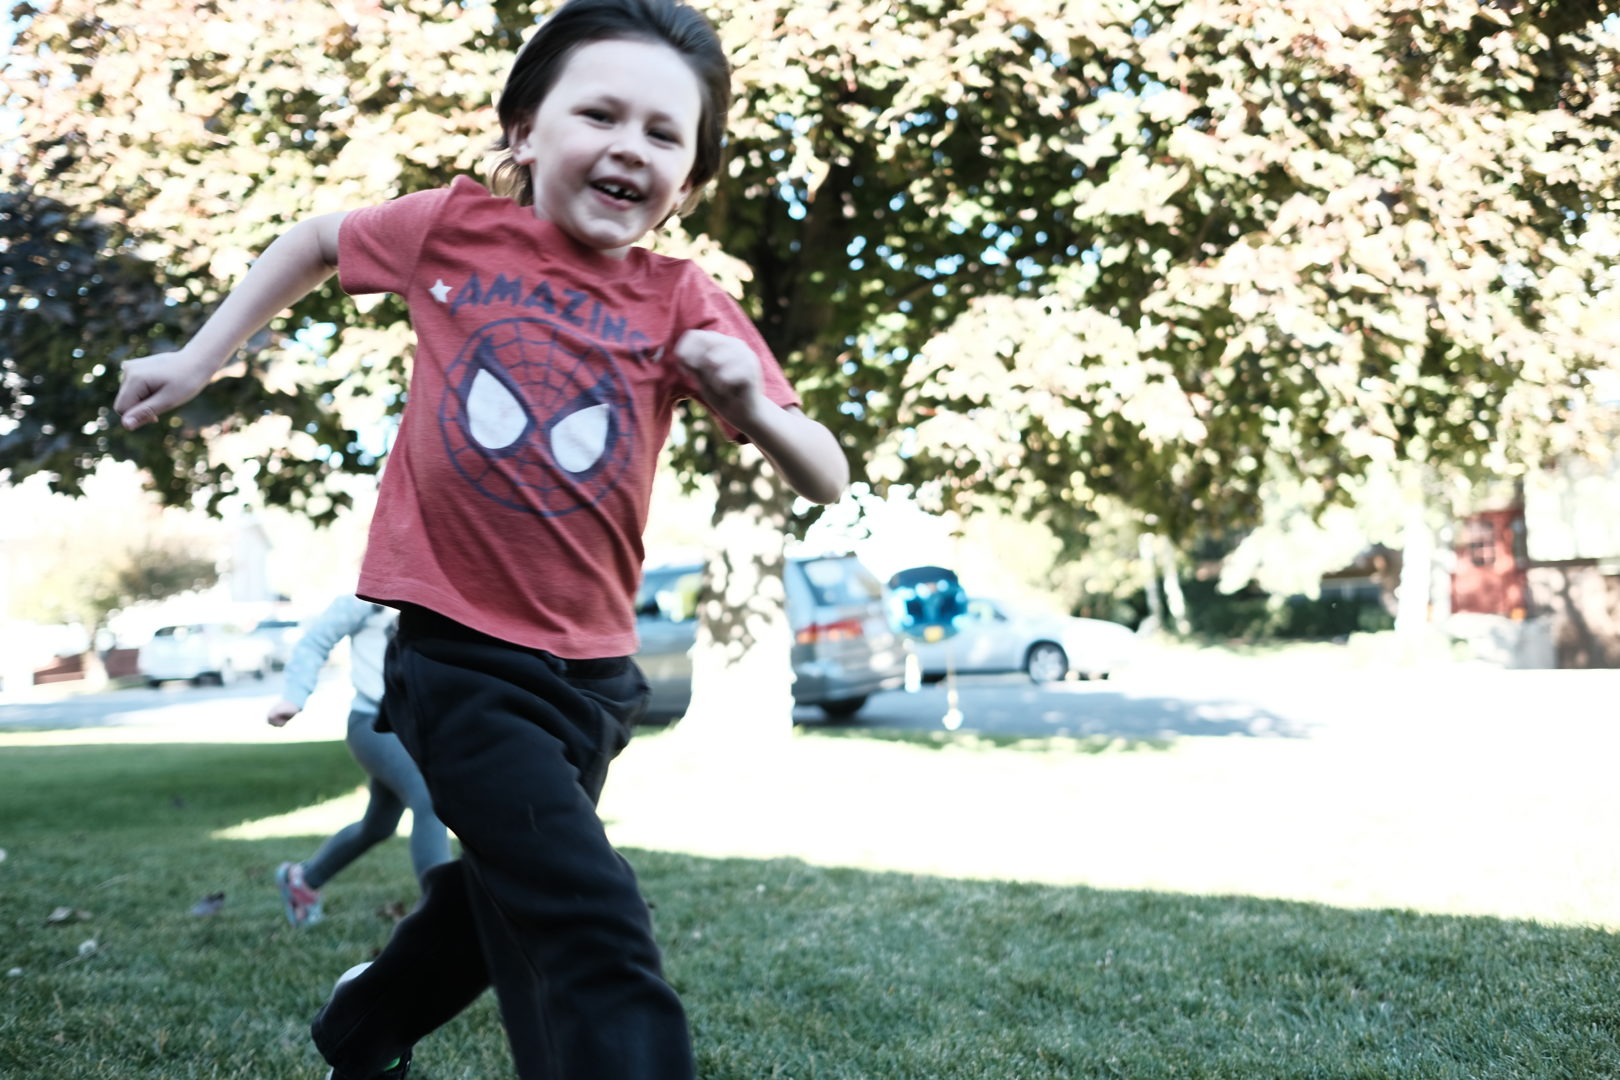 A smiling happy little boy runs past the camera